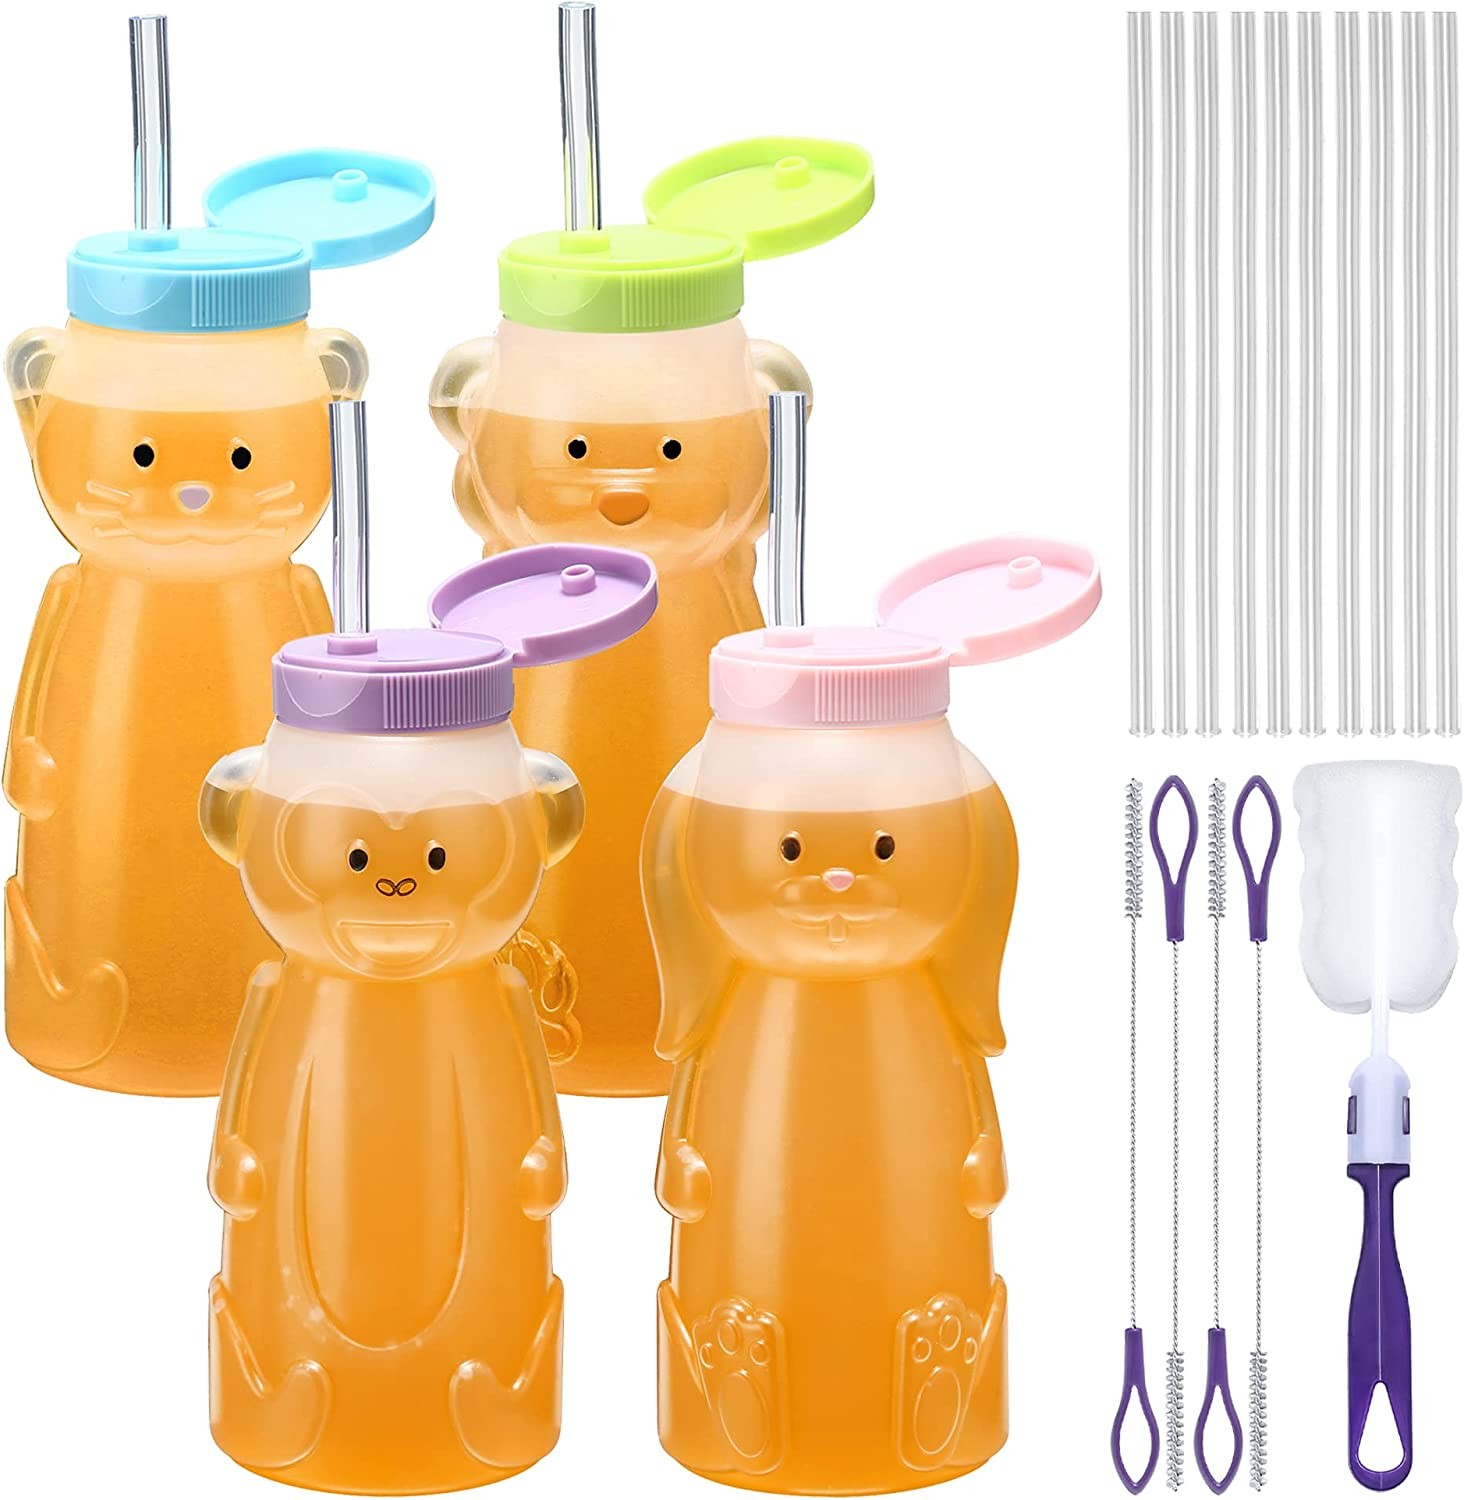 4-Pack Juice Buddies straw cup Long Straws, Squeezable Therapy and Special  Needs Assistive Drink Container, Spill Proof and Leak Resistant Lid